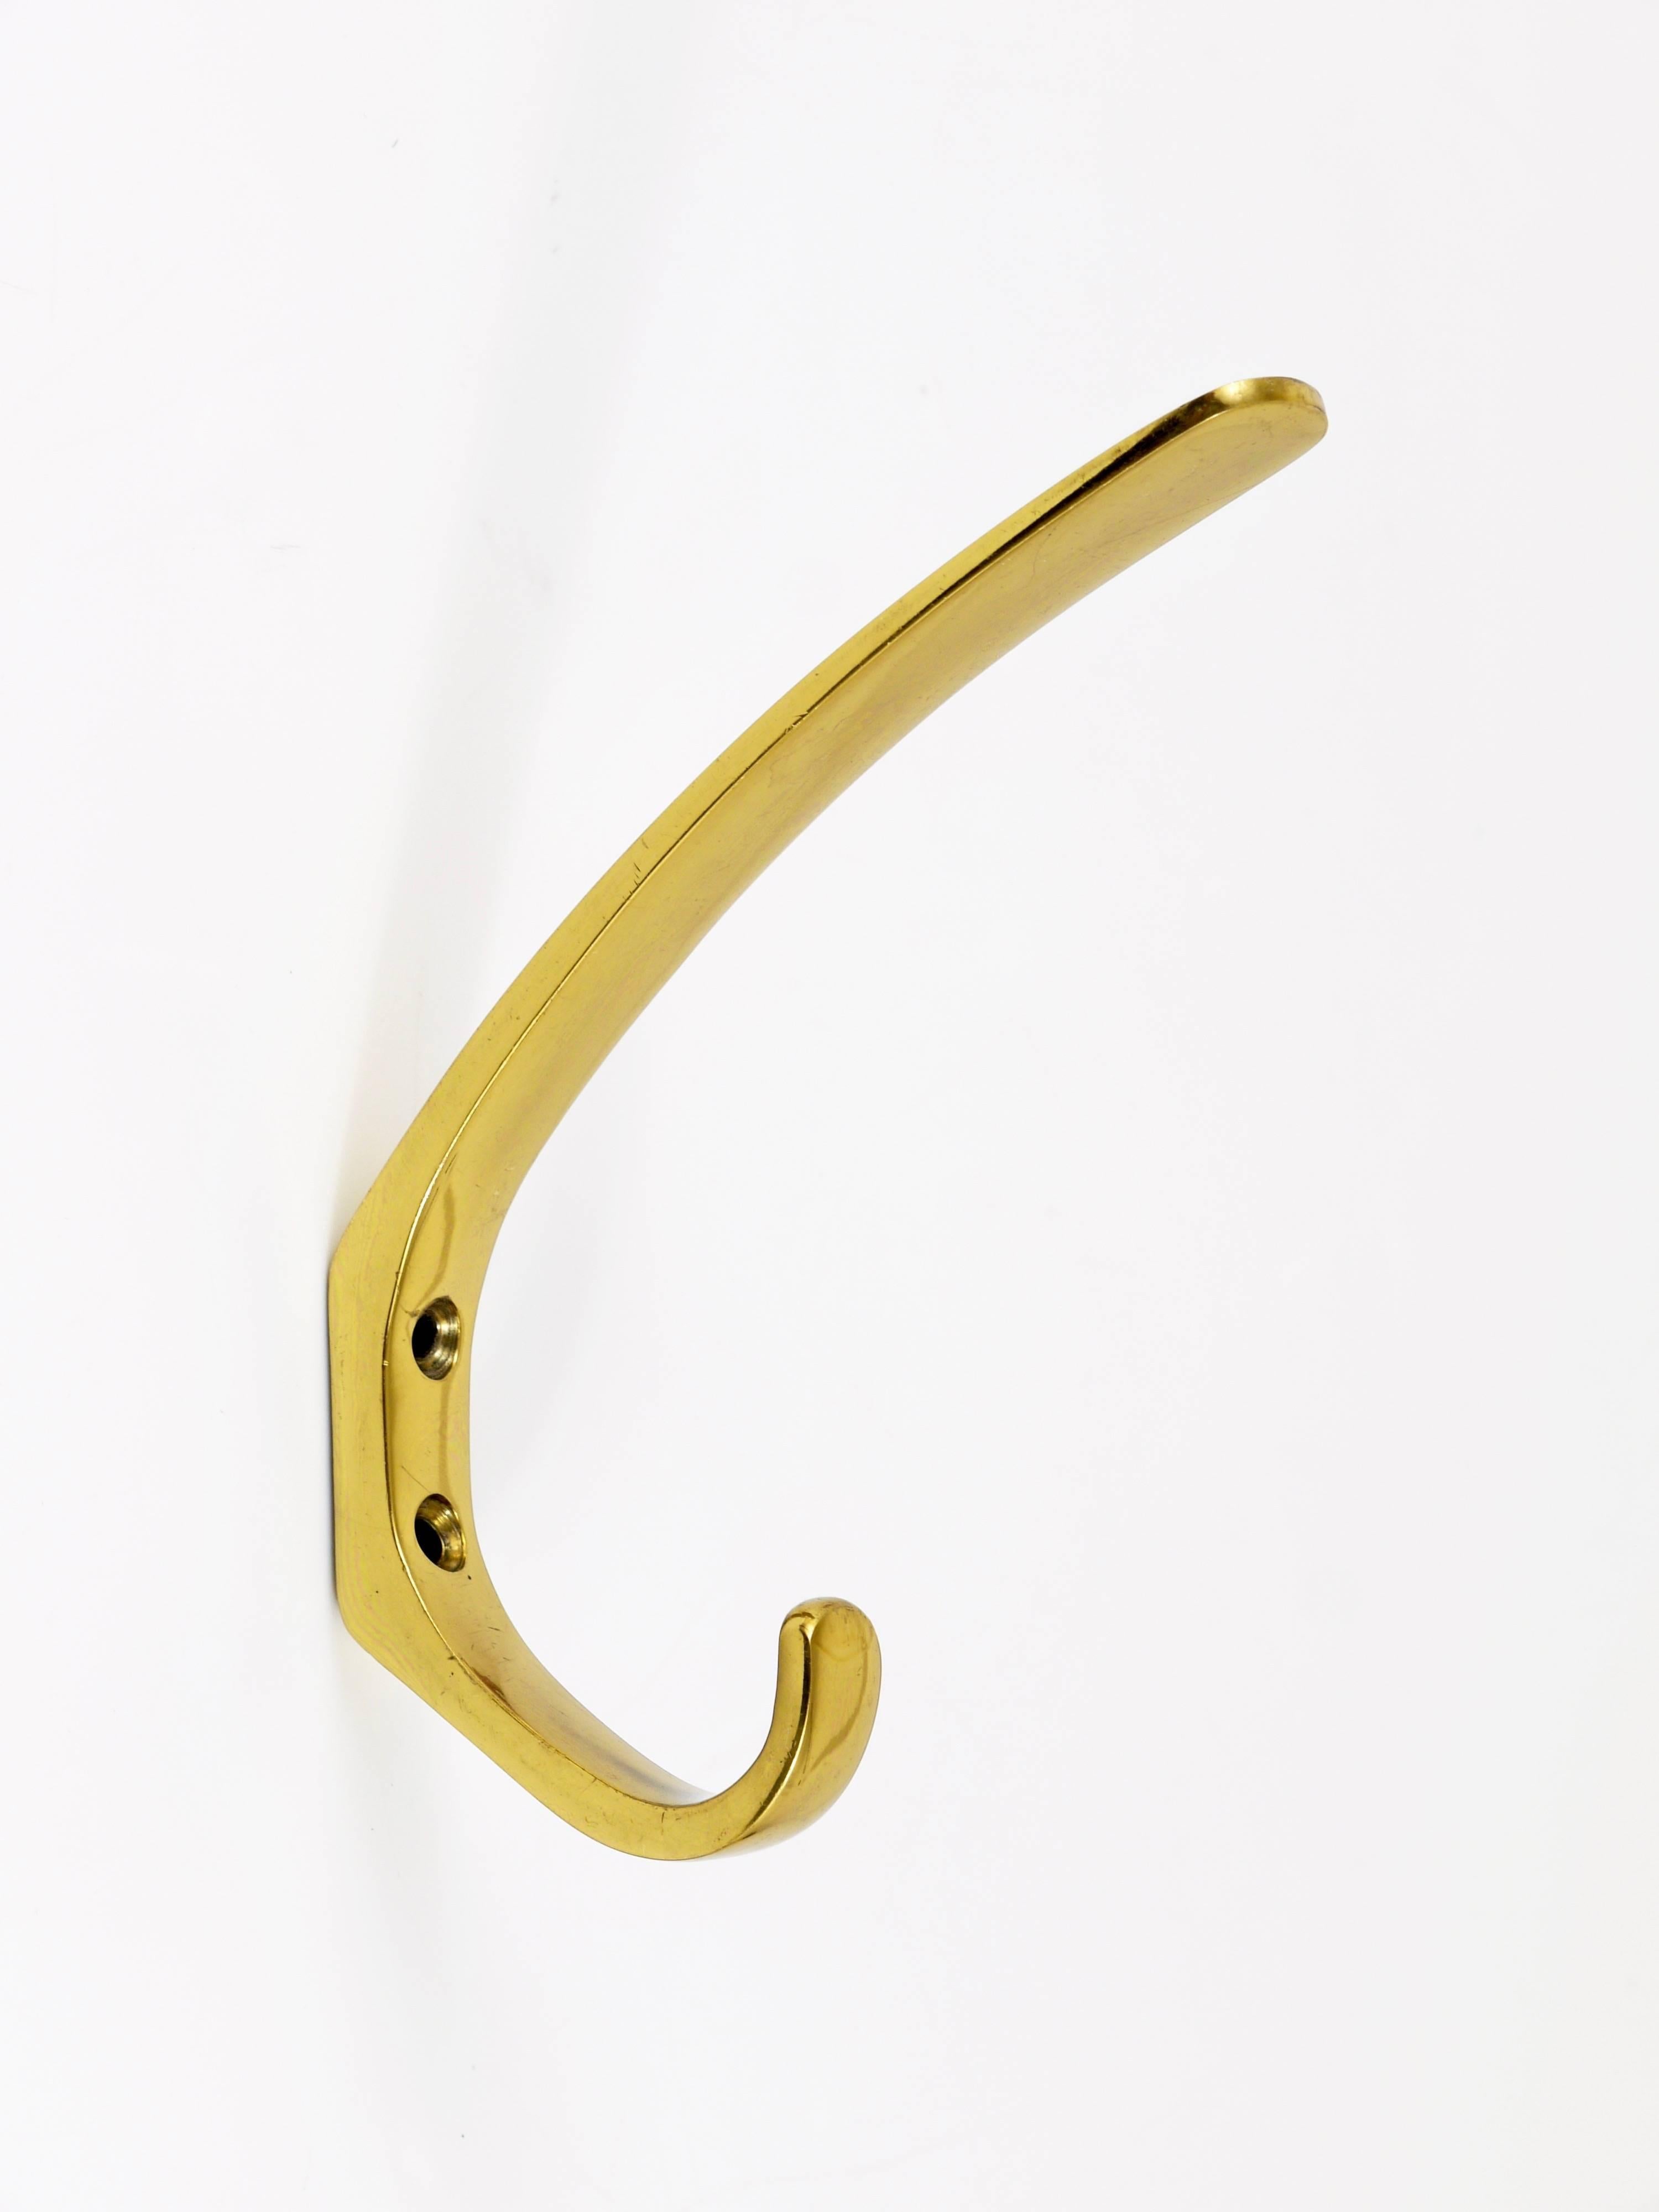 Polished Up to Six Midcentury Brass Wall Coat Hooks by Hertha Baller, Austria, 1950s